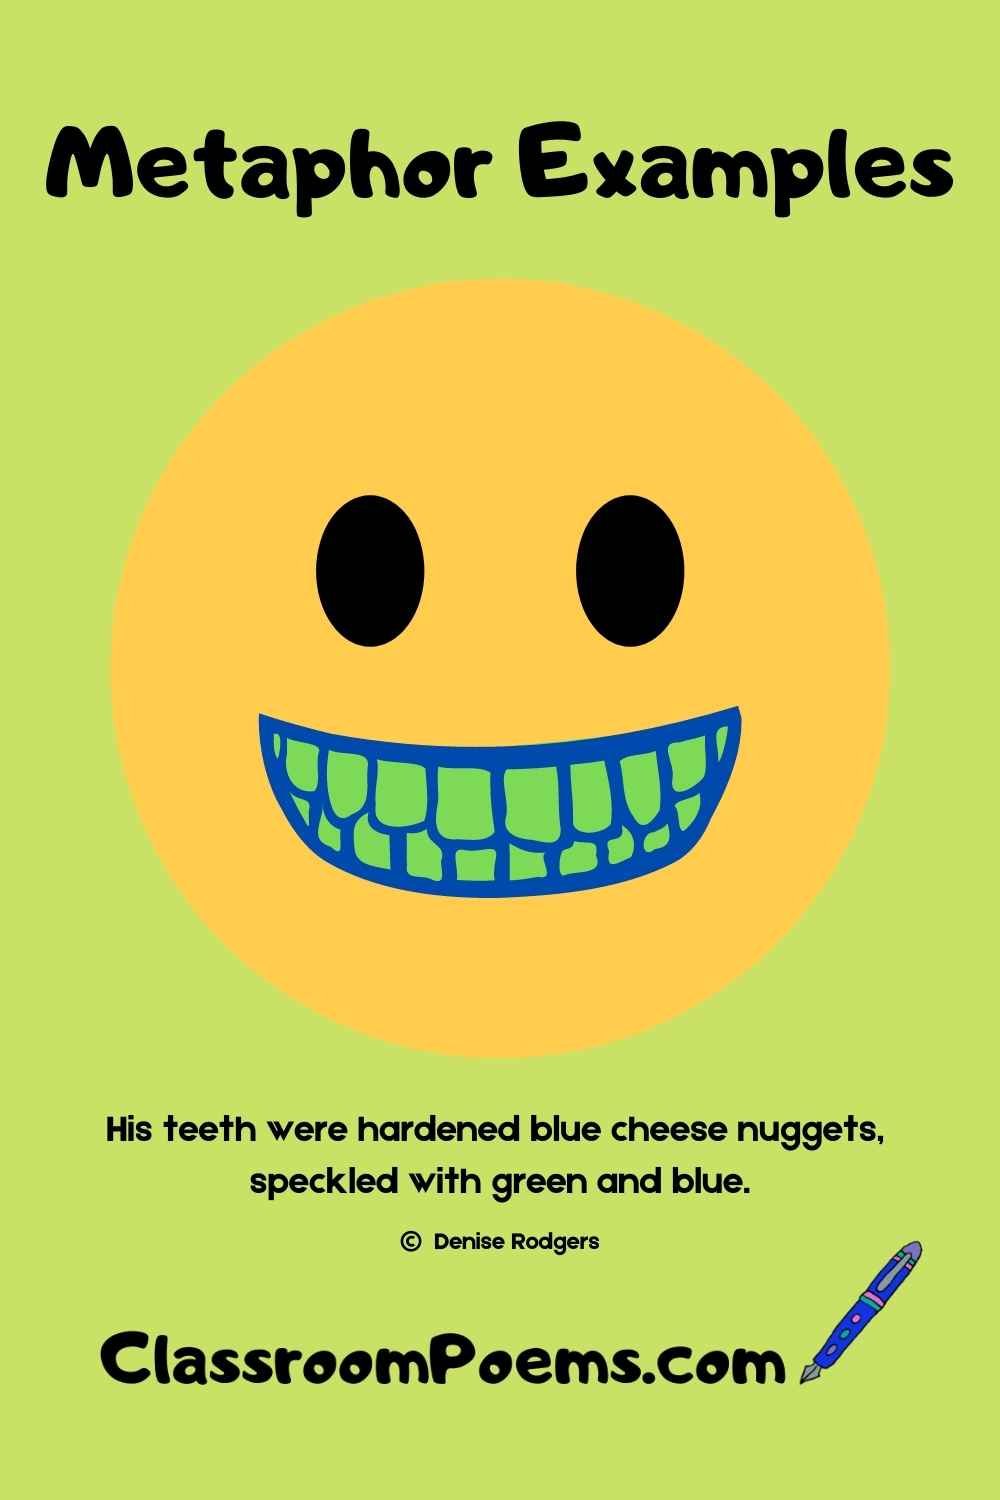 Green teeth metaphor example by Denise Rodgers on  ClassroomPoems.com.